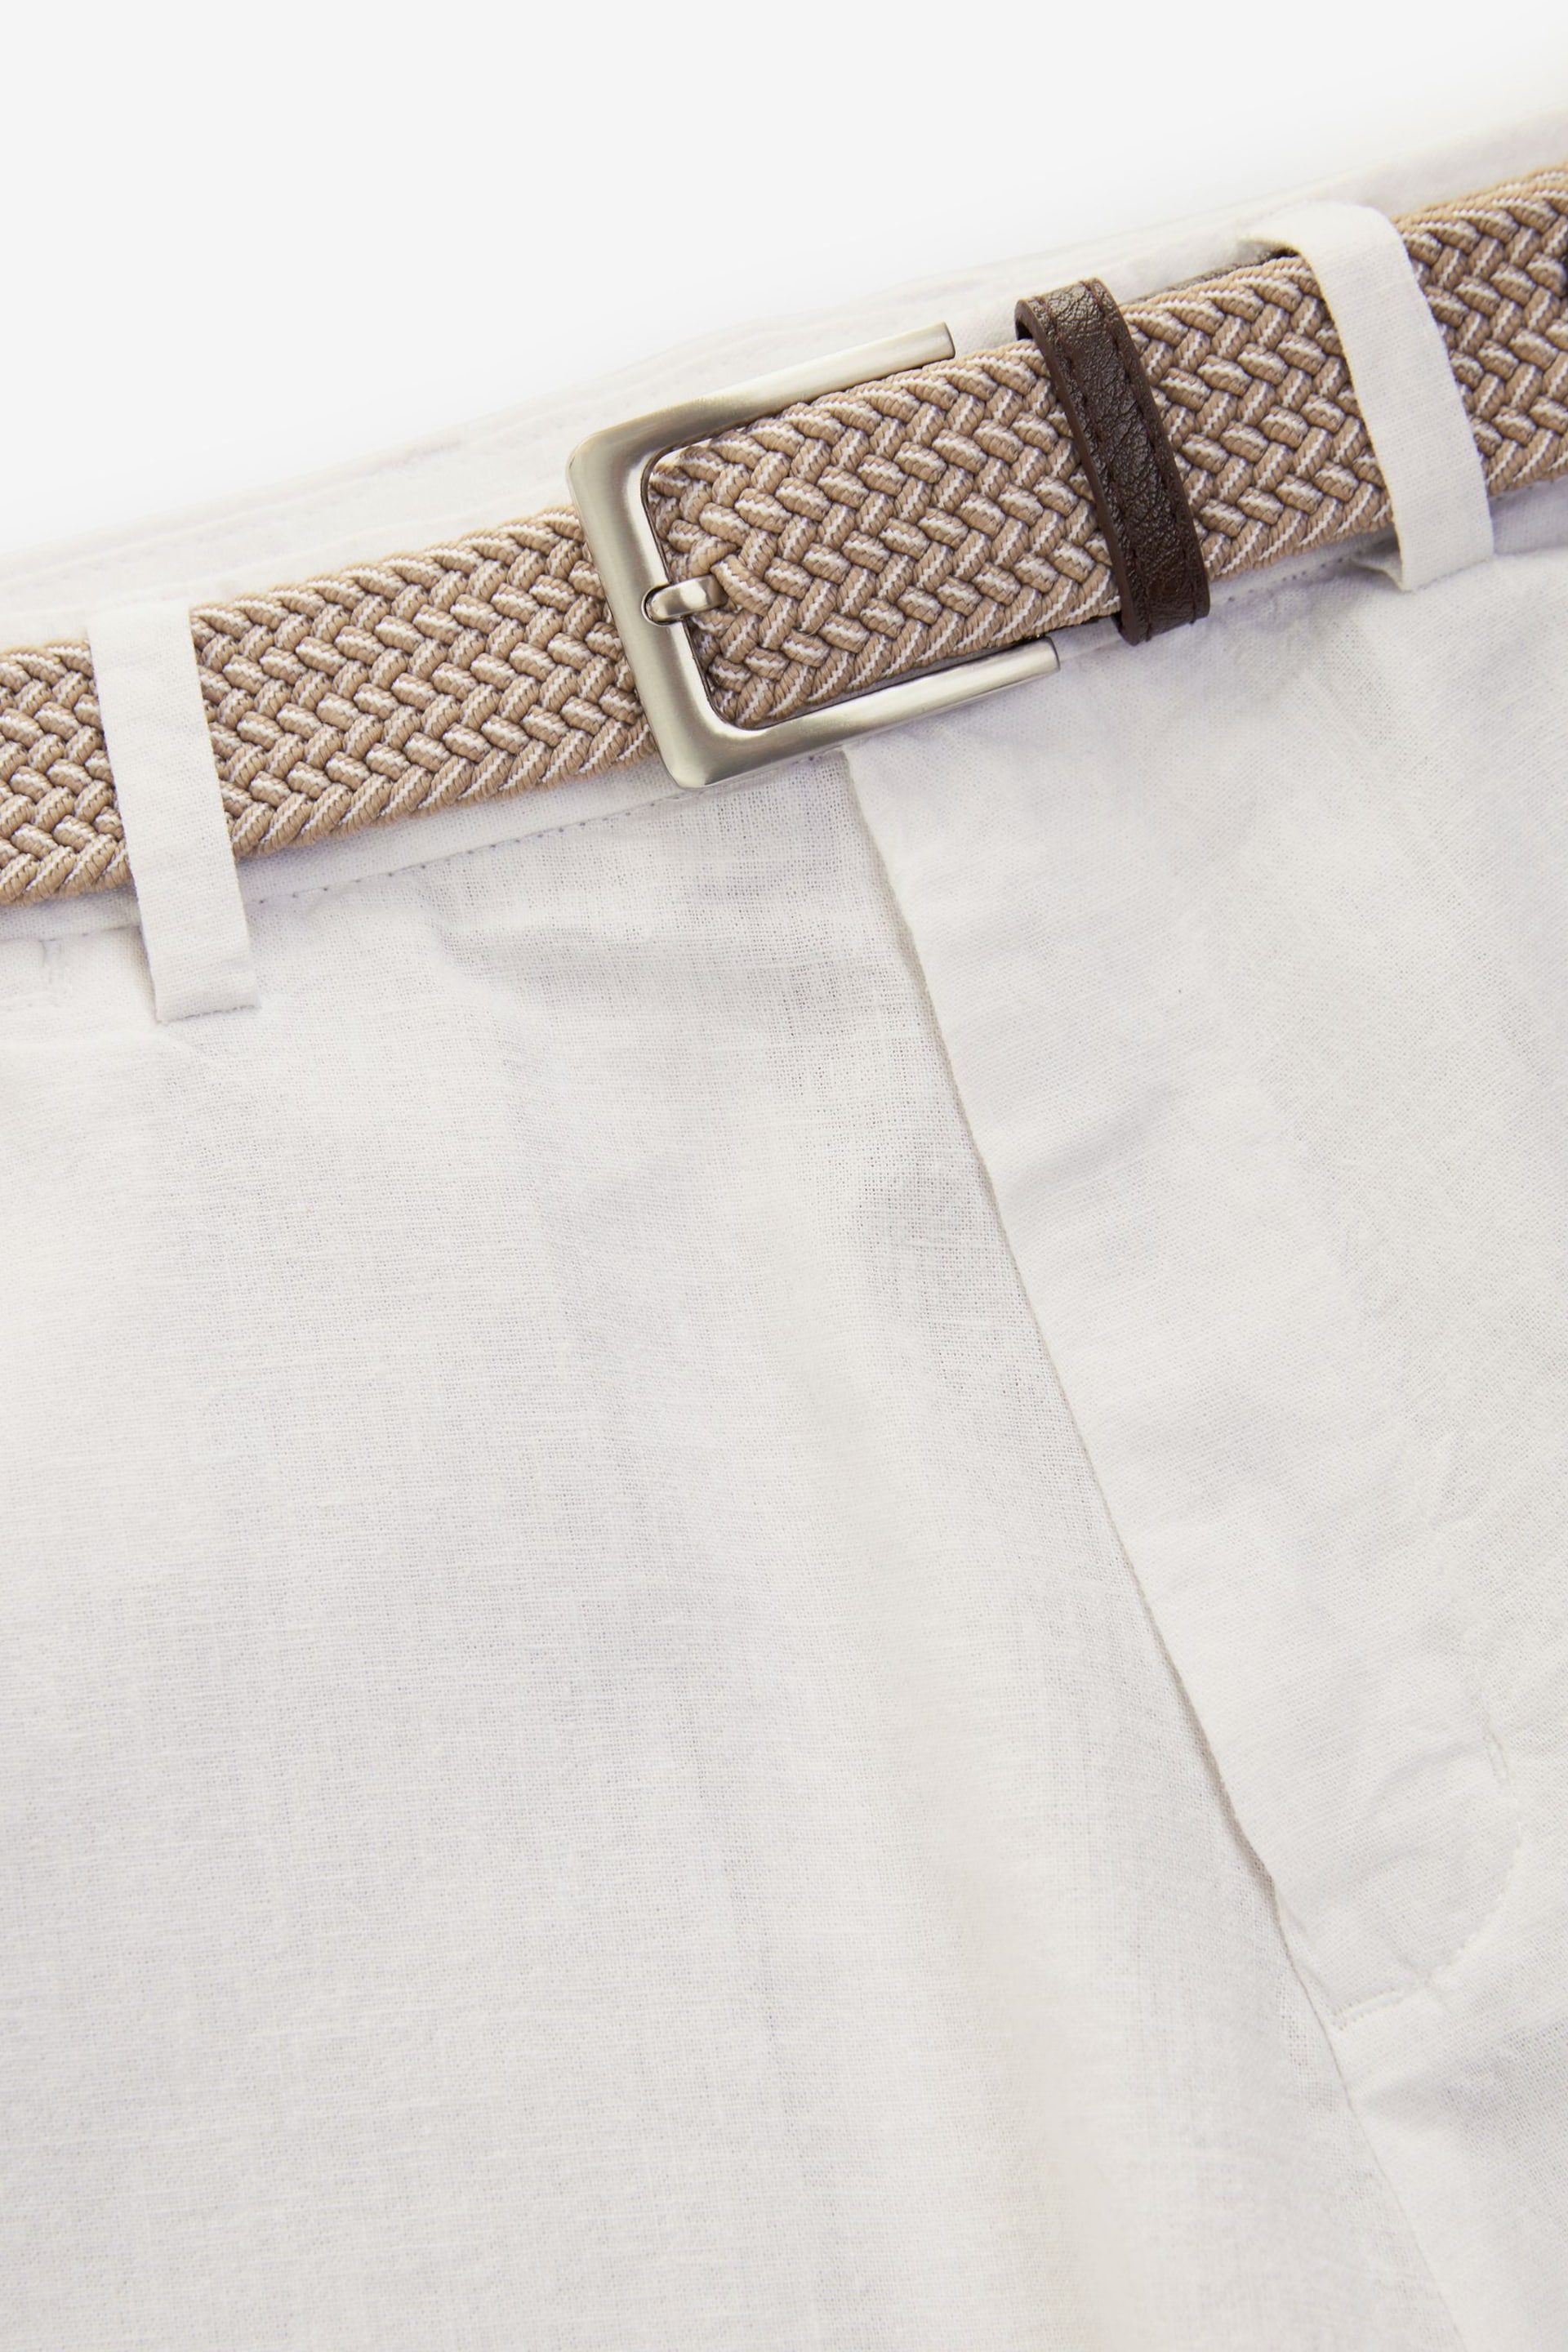 White Linen Cotton Chino Shorts with Belt Included - Image 6 of 7